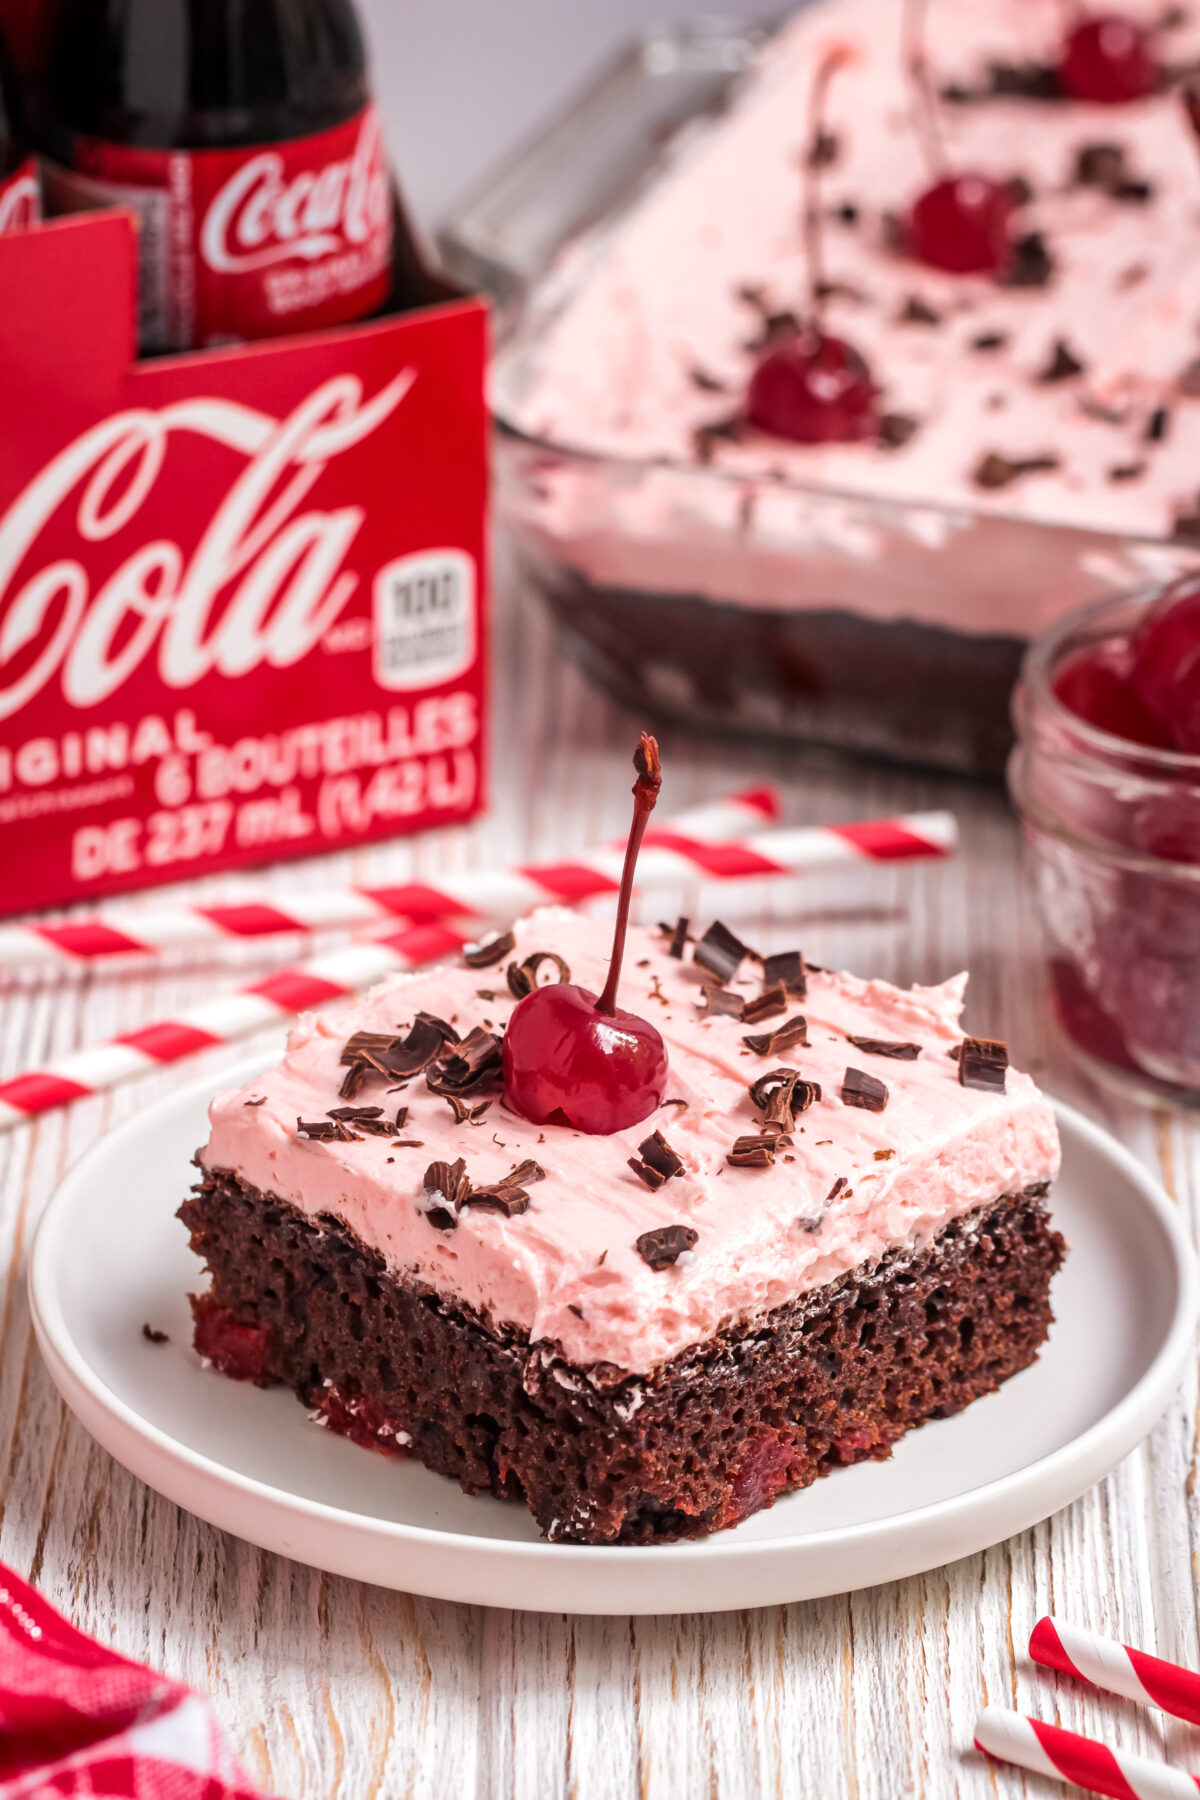 This easy chocolate cherry coke cake recipe is made with coca cola, cake mix, and maraschino cherries. You will love how moist this cake is.